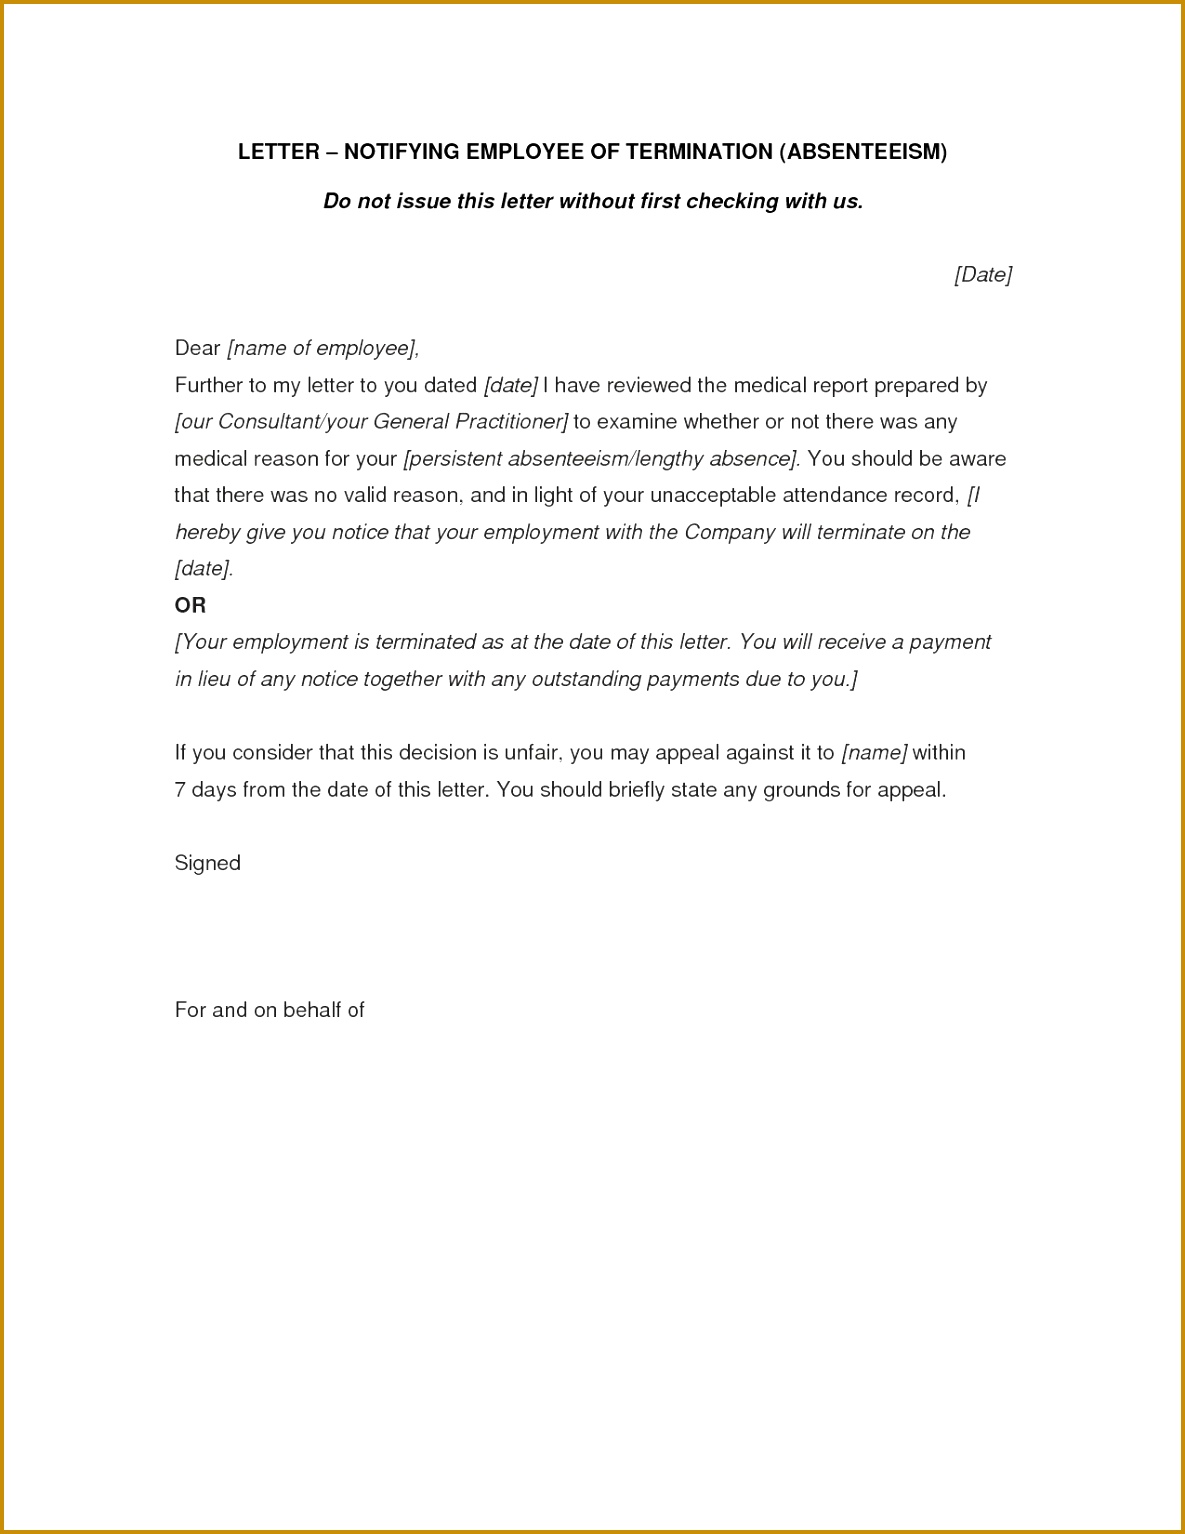 Neighbor Notification Template 97883 Letter Separation From Employer Ideas 15341185